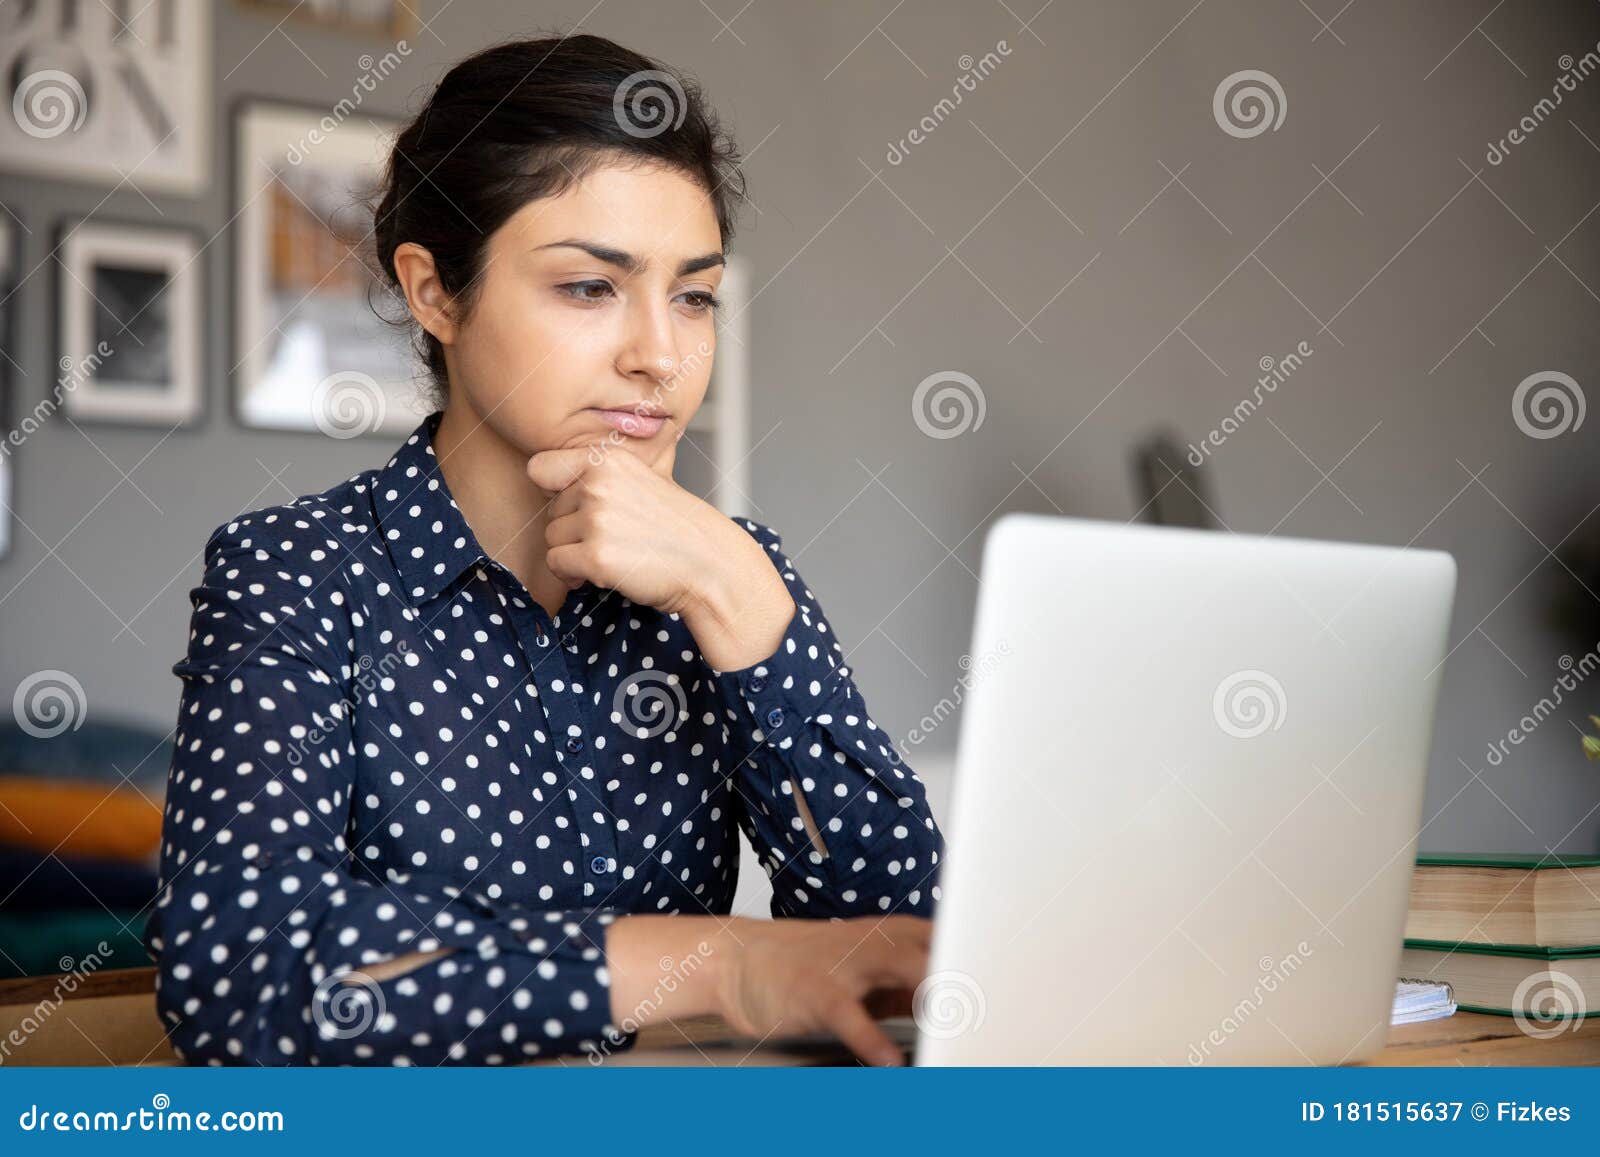 thoughtful young indian woman looking at computer screen.